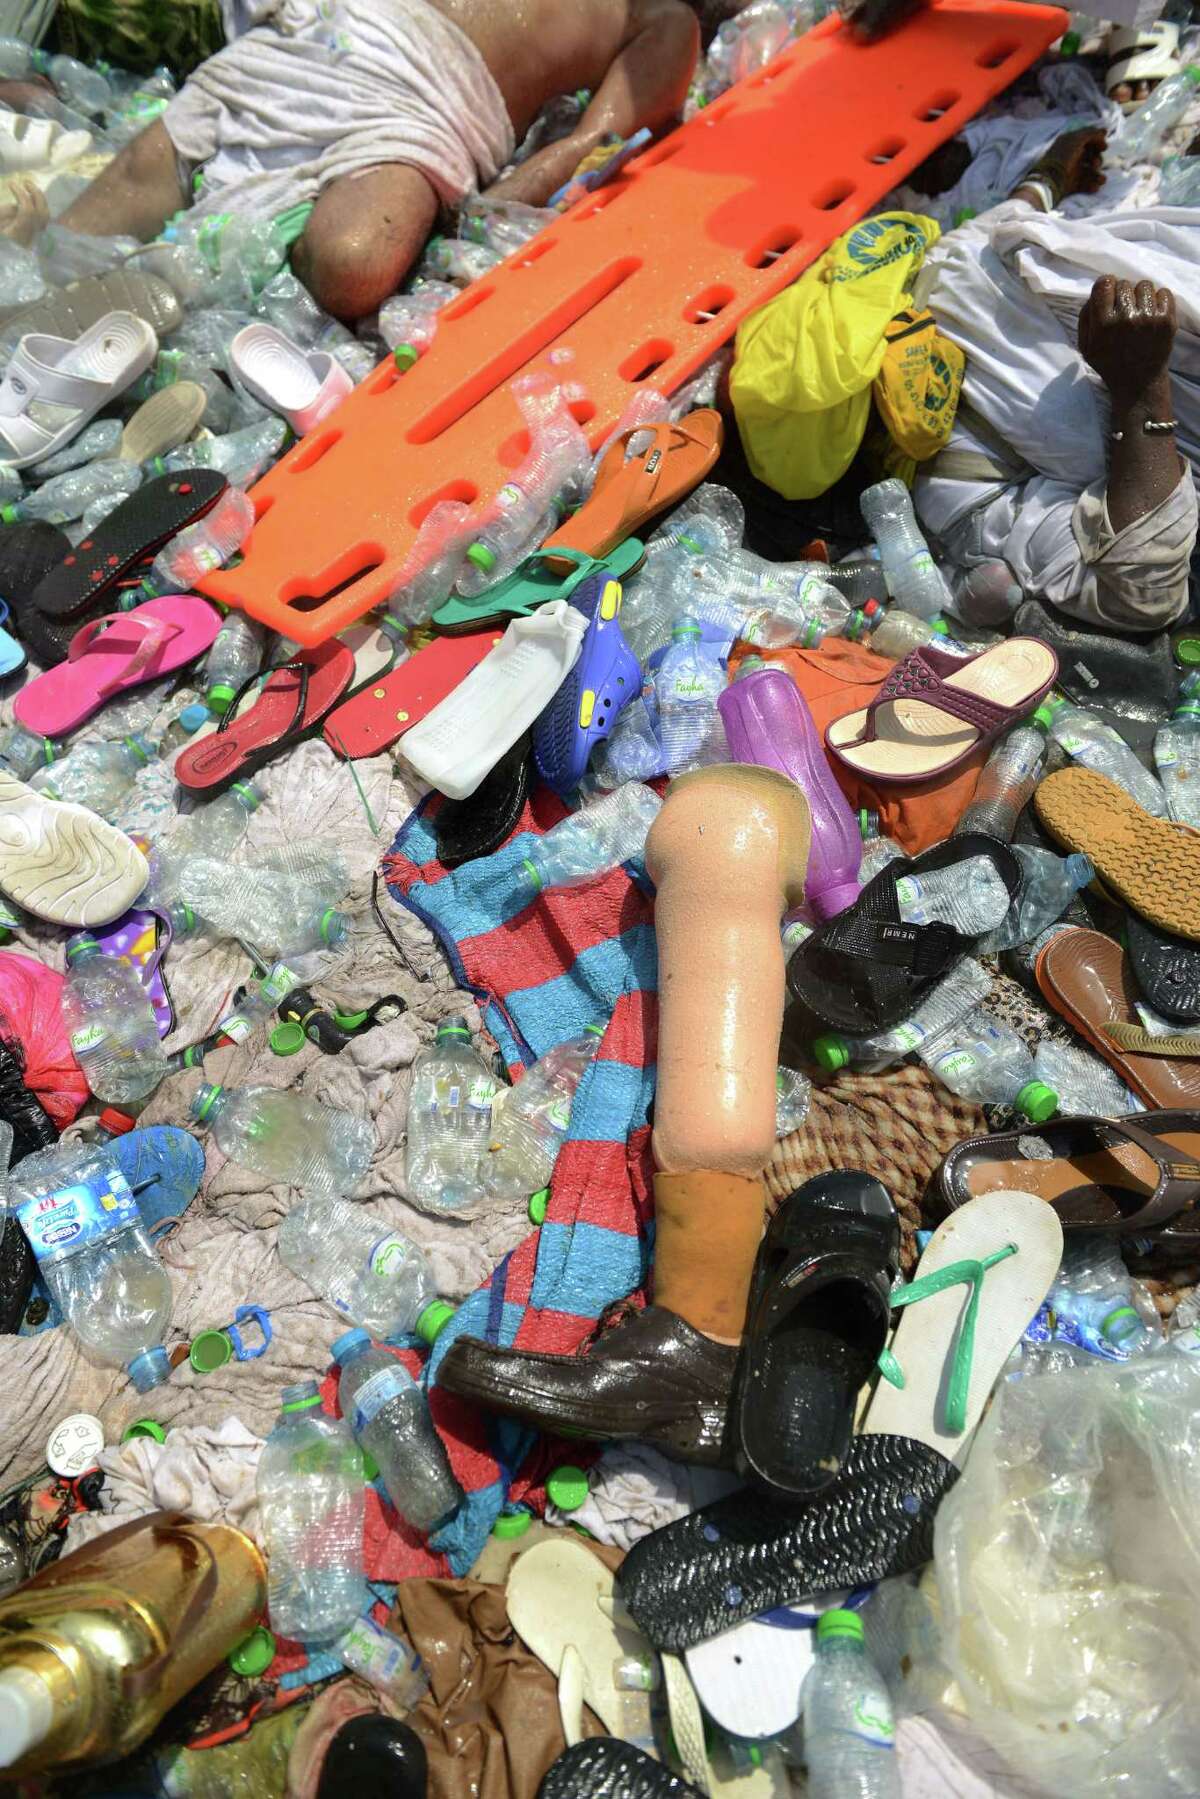 In this picture taken Thursday, Sept. 24, 2014, bodies of people crushed in Mina, Saudi Arabia during the annual hajj pilgrimage, are seen amongst belongings and empty water bottles. Hundreds were killed and injured, Saudi authorities said. The crush happened in Mina, a large valley about five kilometers (three miles) from the holy city of Mecca that has been the site of hajj stampedes in years past.